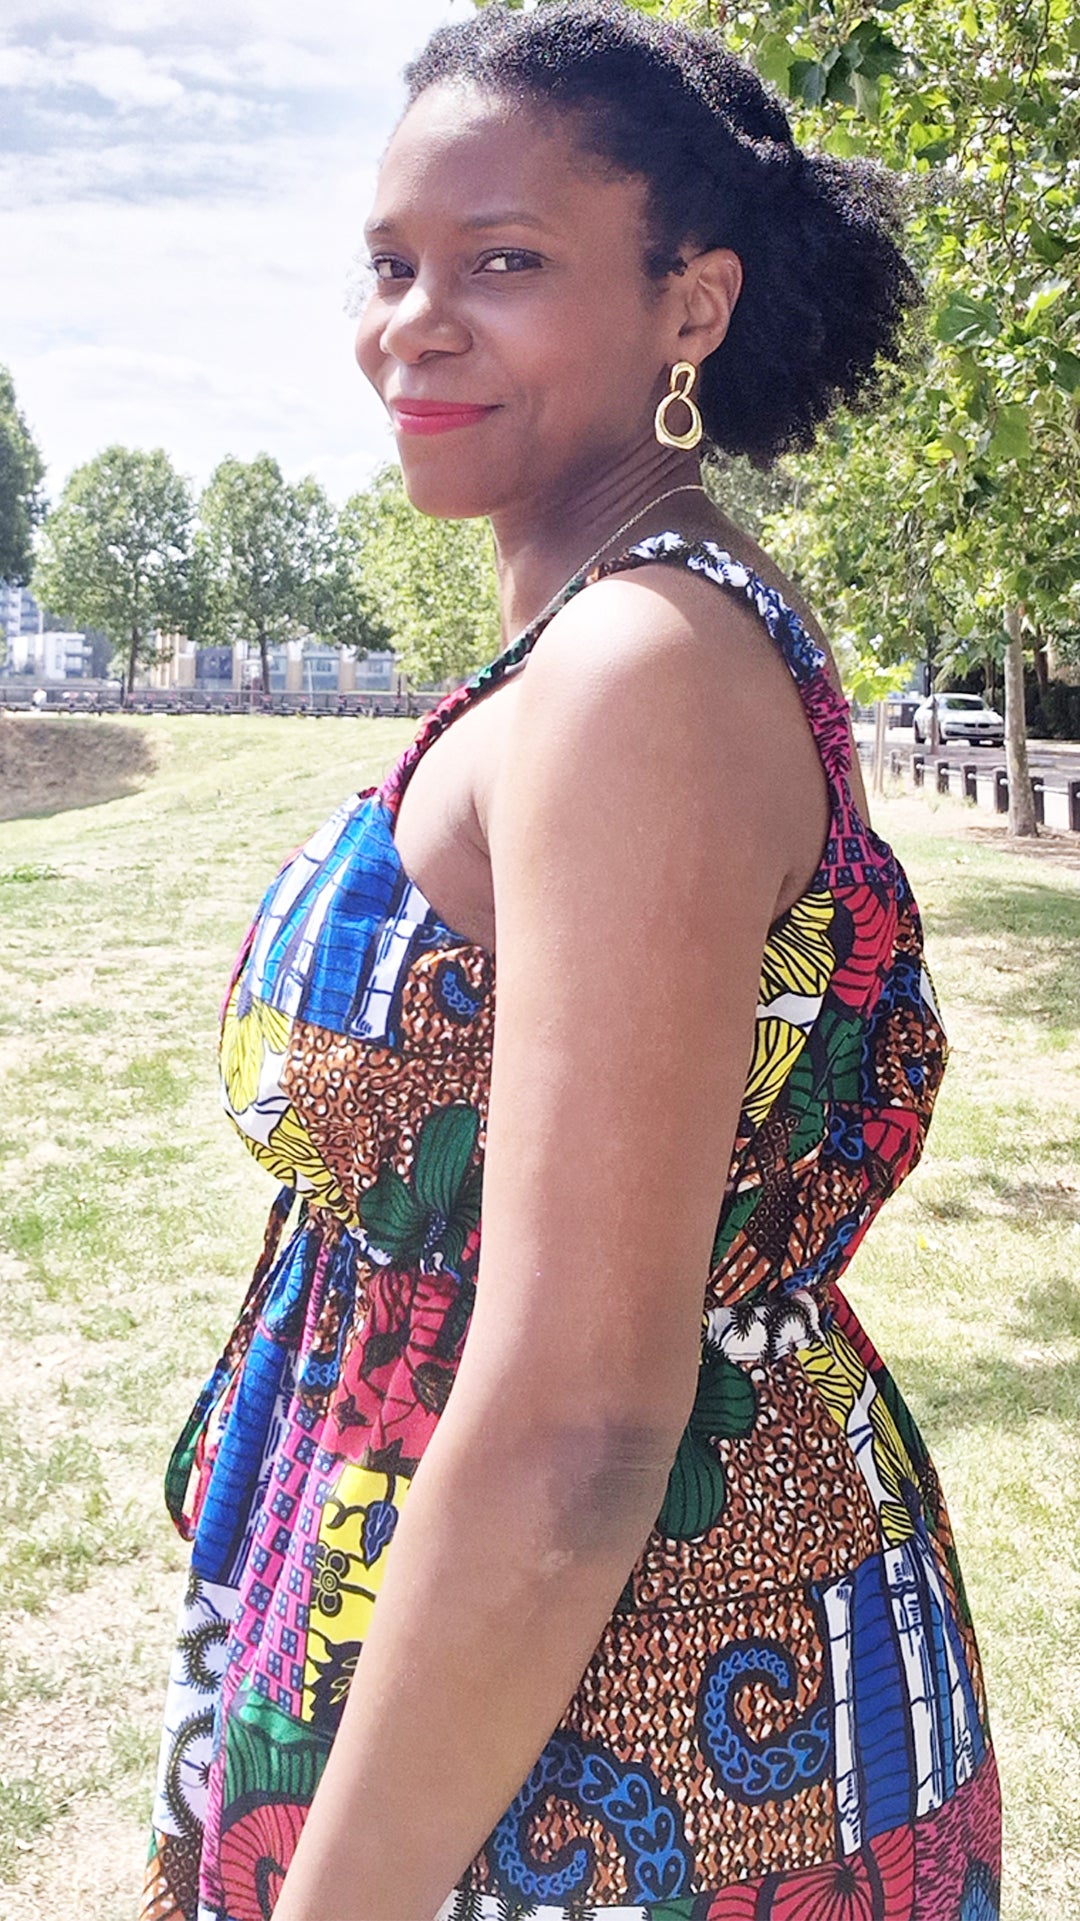 A woman exuding grace, wearing a 3/4 short patchwork dress, the view capturing a shoulder shot in the midst of a picturesque park setting.